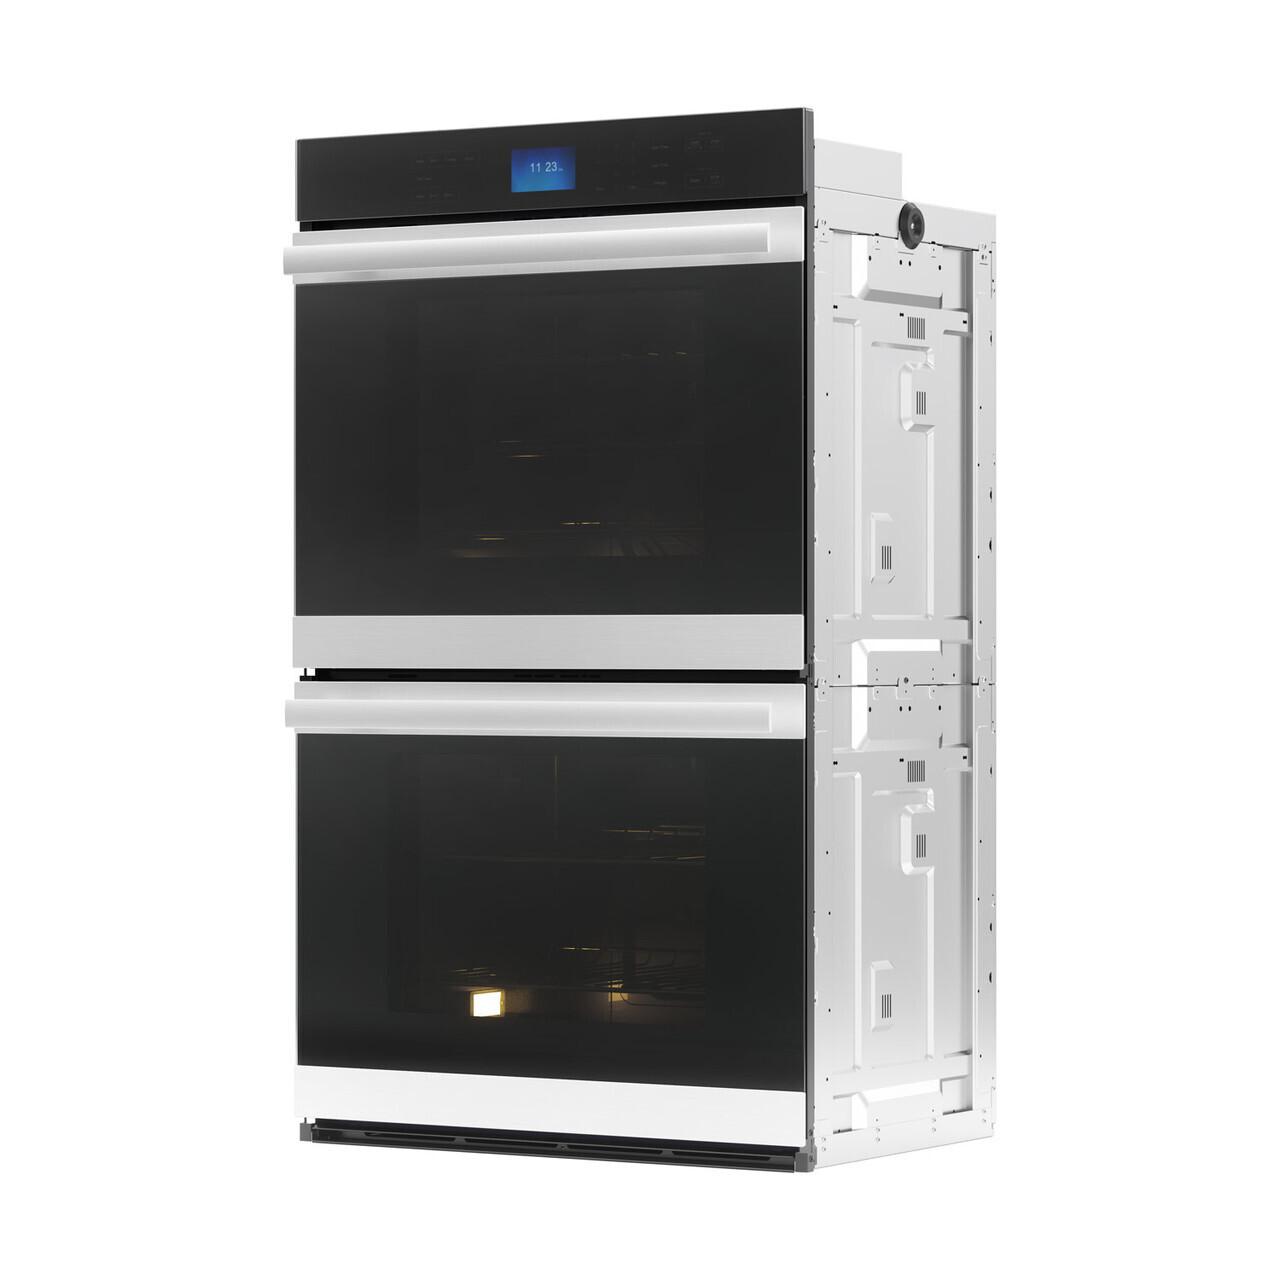 Sharp Built-In Double Wall Oven